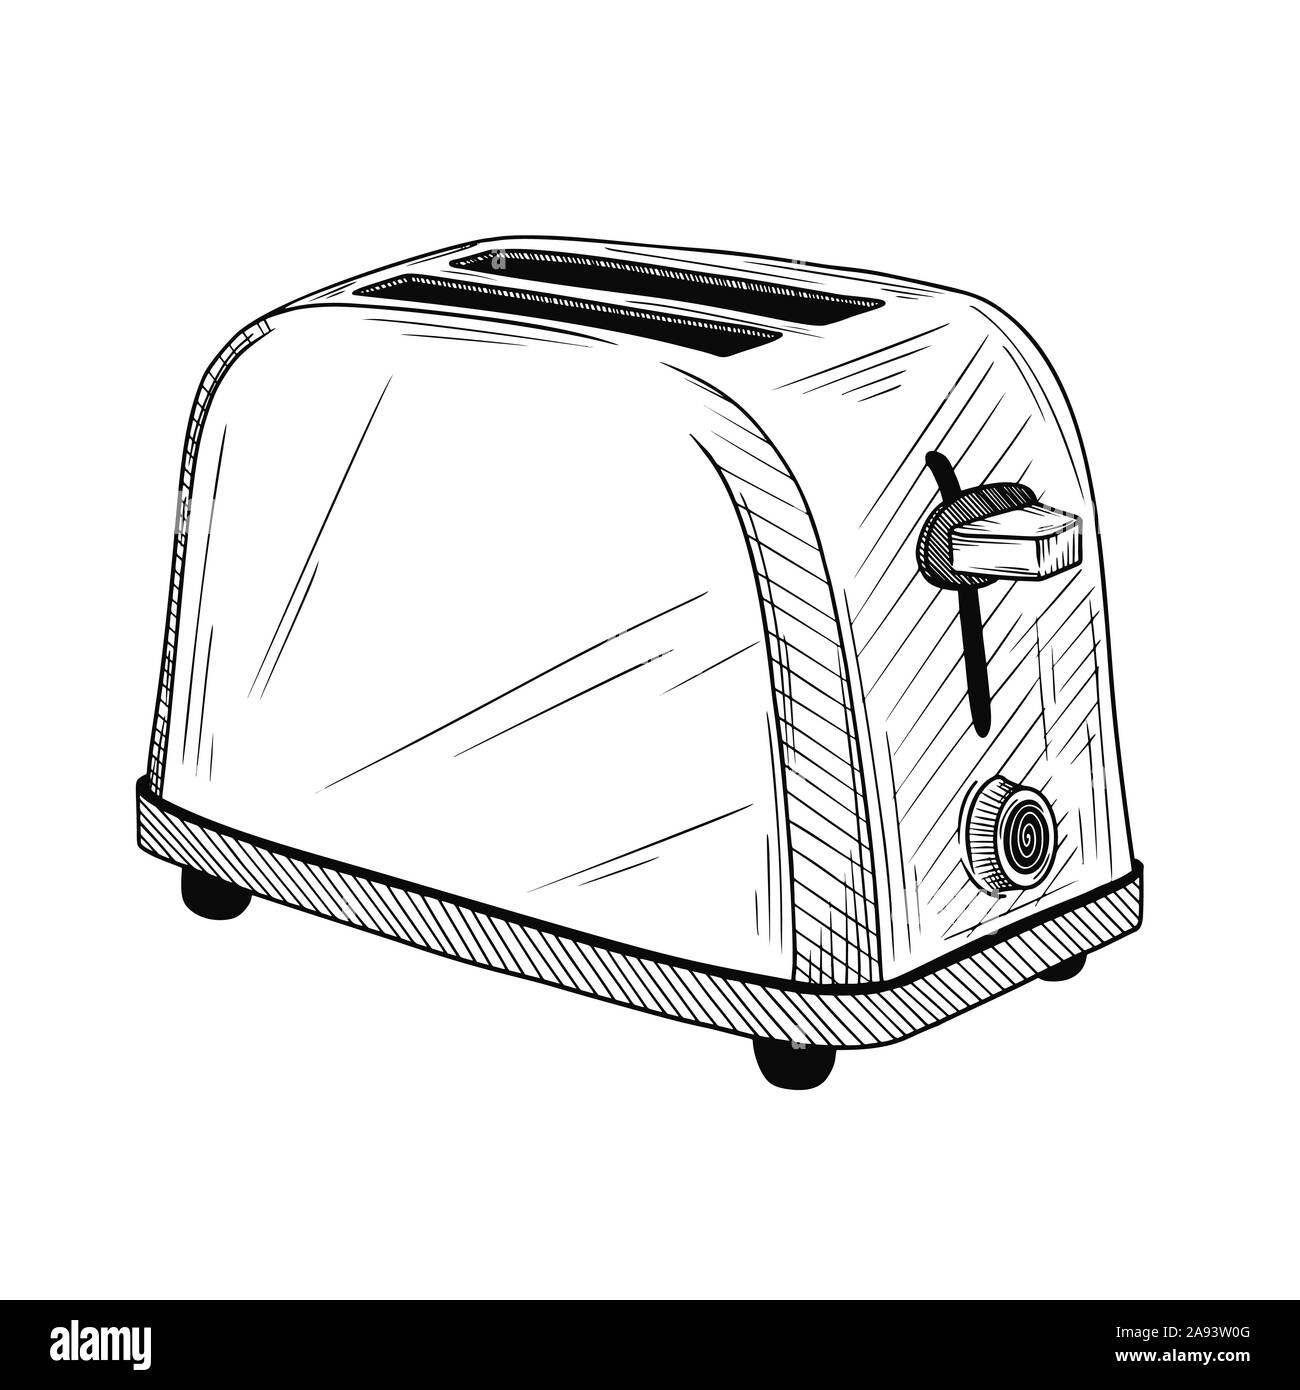 Sketch toaster on a white background. Vector illustration in sketch style. Stock Vector